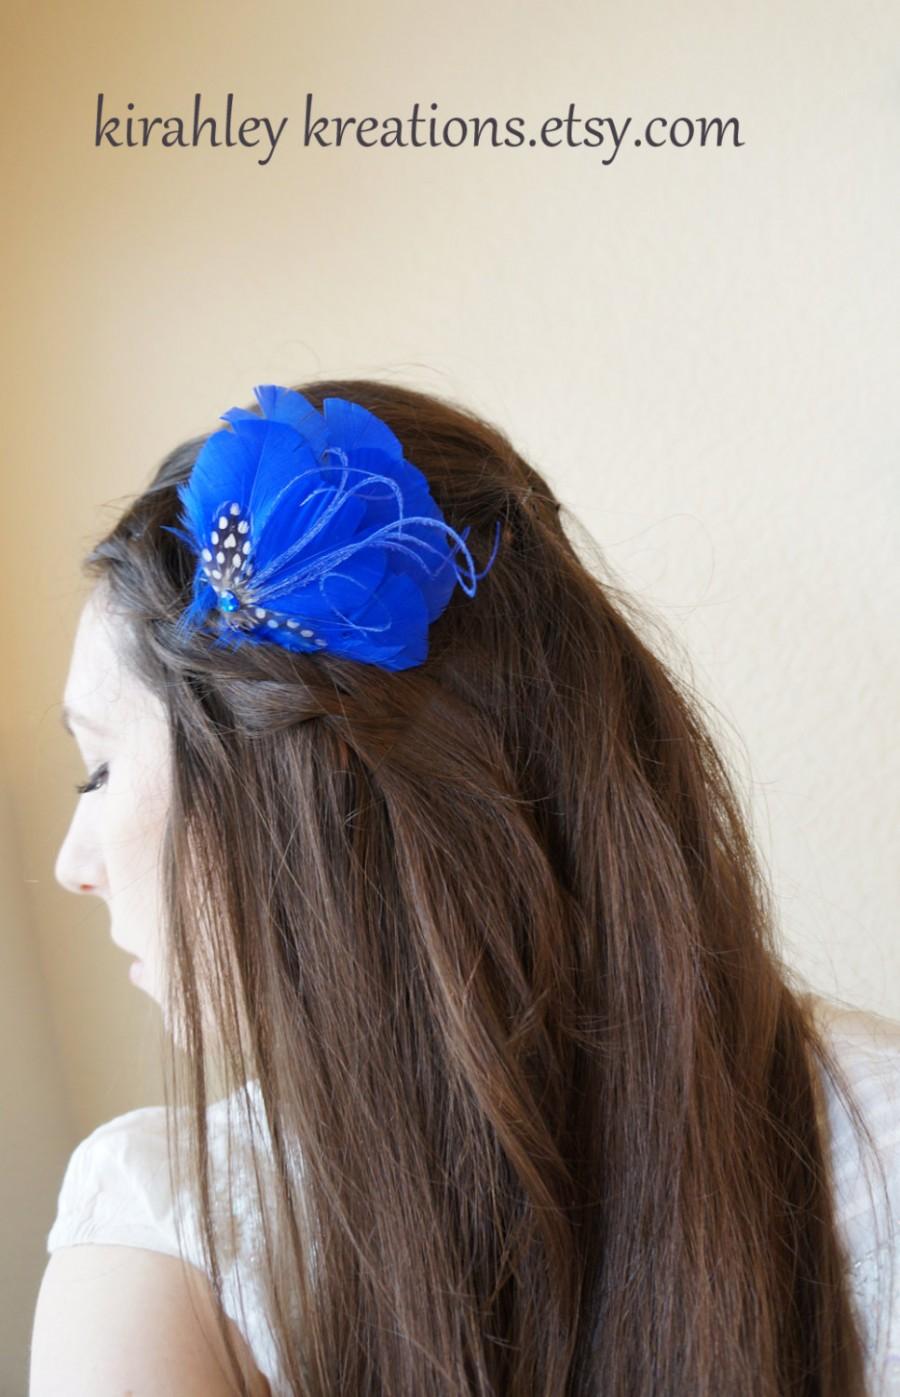 Mariage - Royal Cobalt Something BLUE BETTY Feather Fascinator Hairpiece Hair Clip Spotted Guinea Peacock Herl Jewel Bride Bridal Bridesmaid Prom